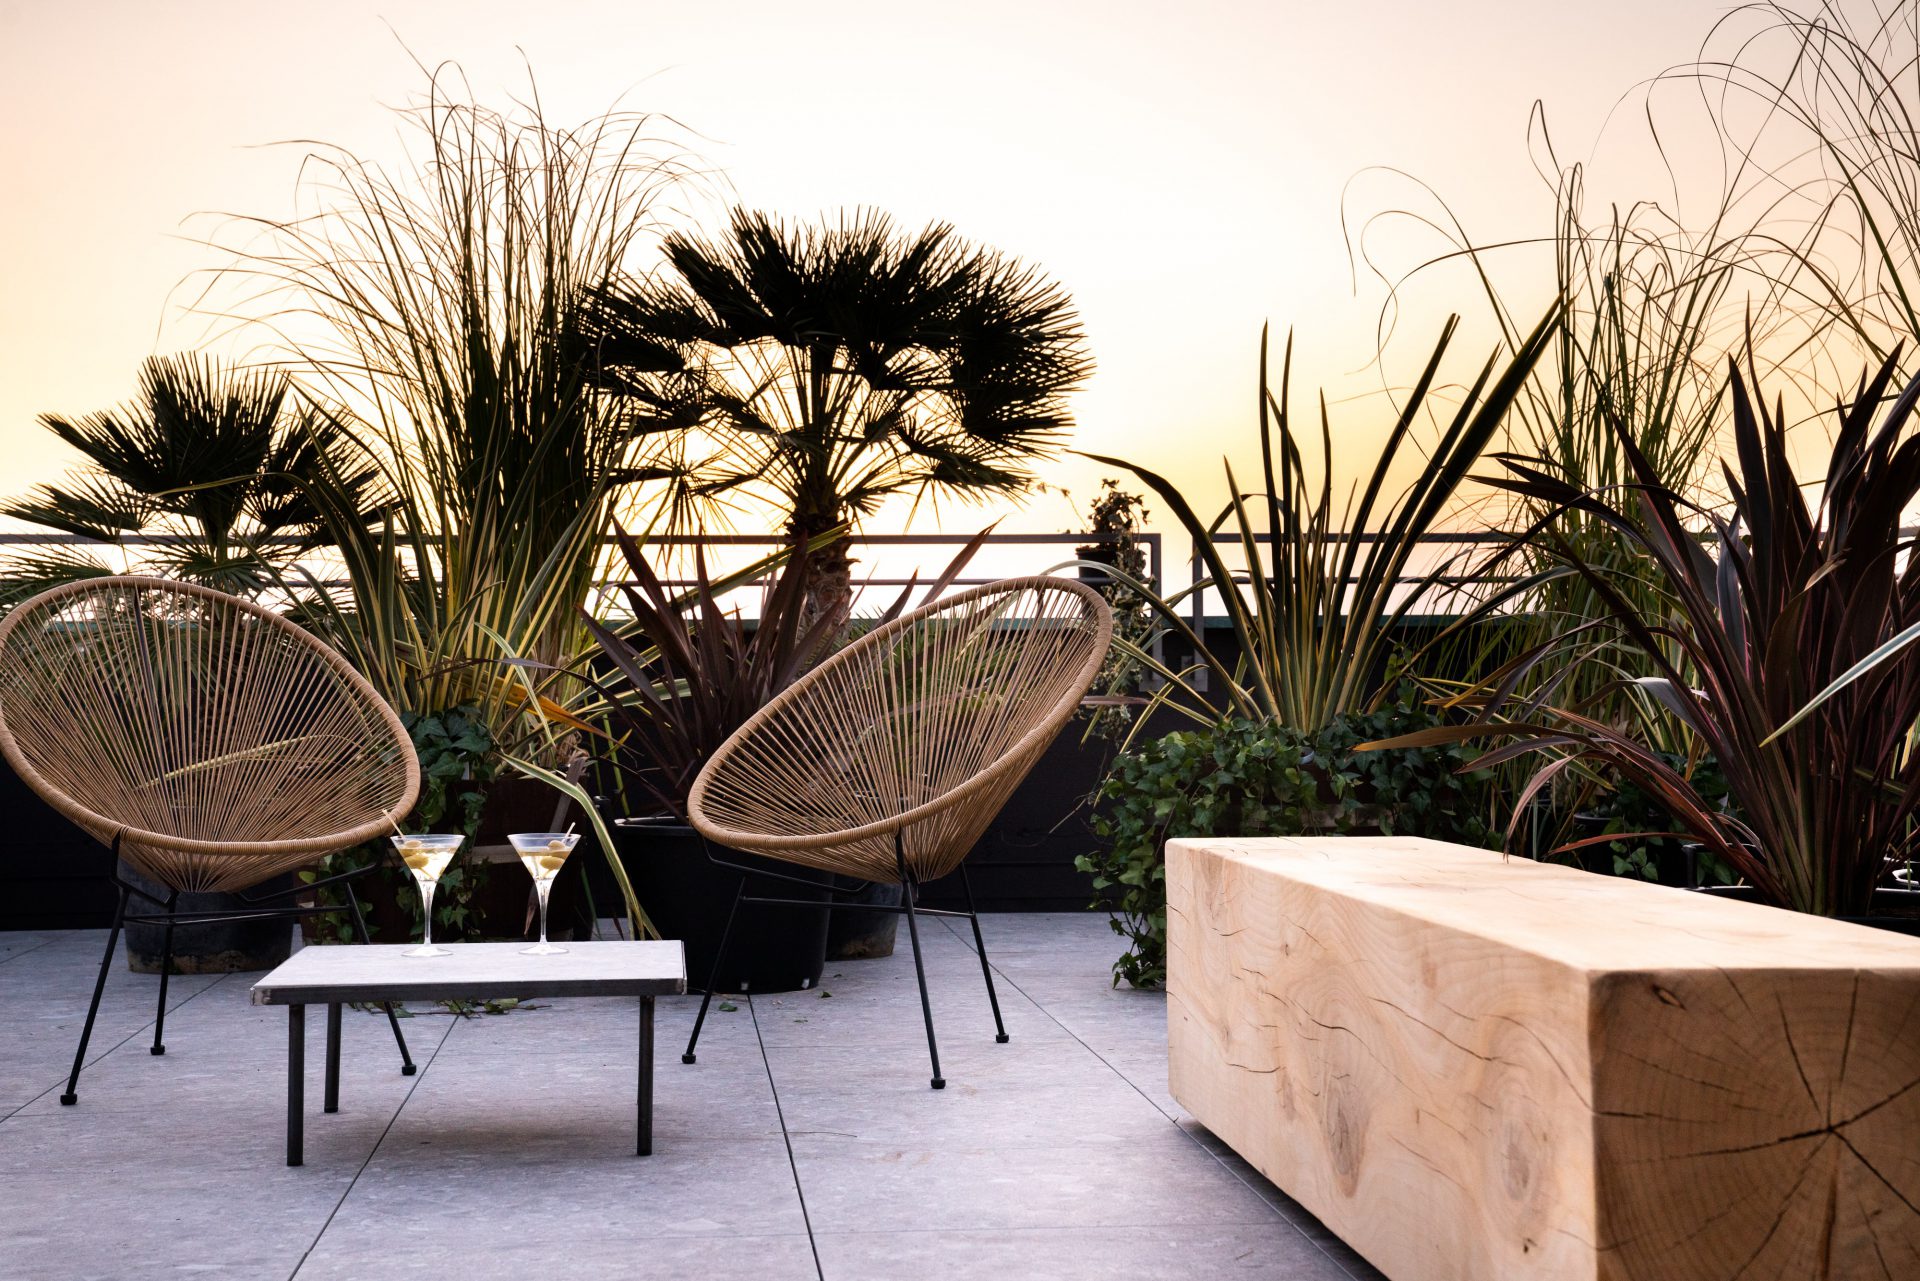 Attico, the terrace is designed with earthy-colored furniture